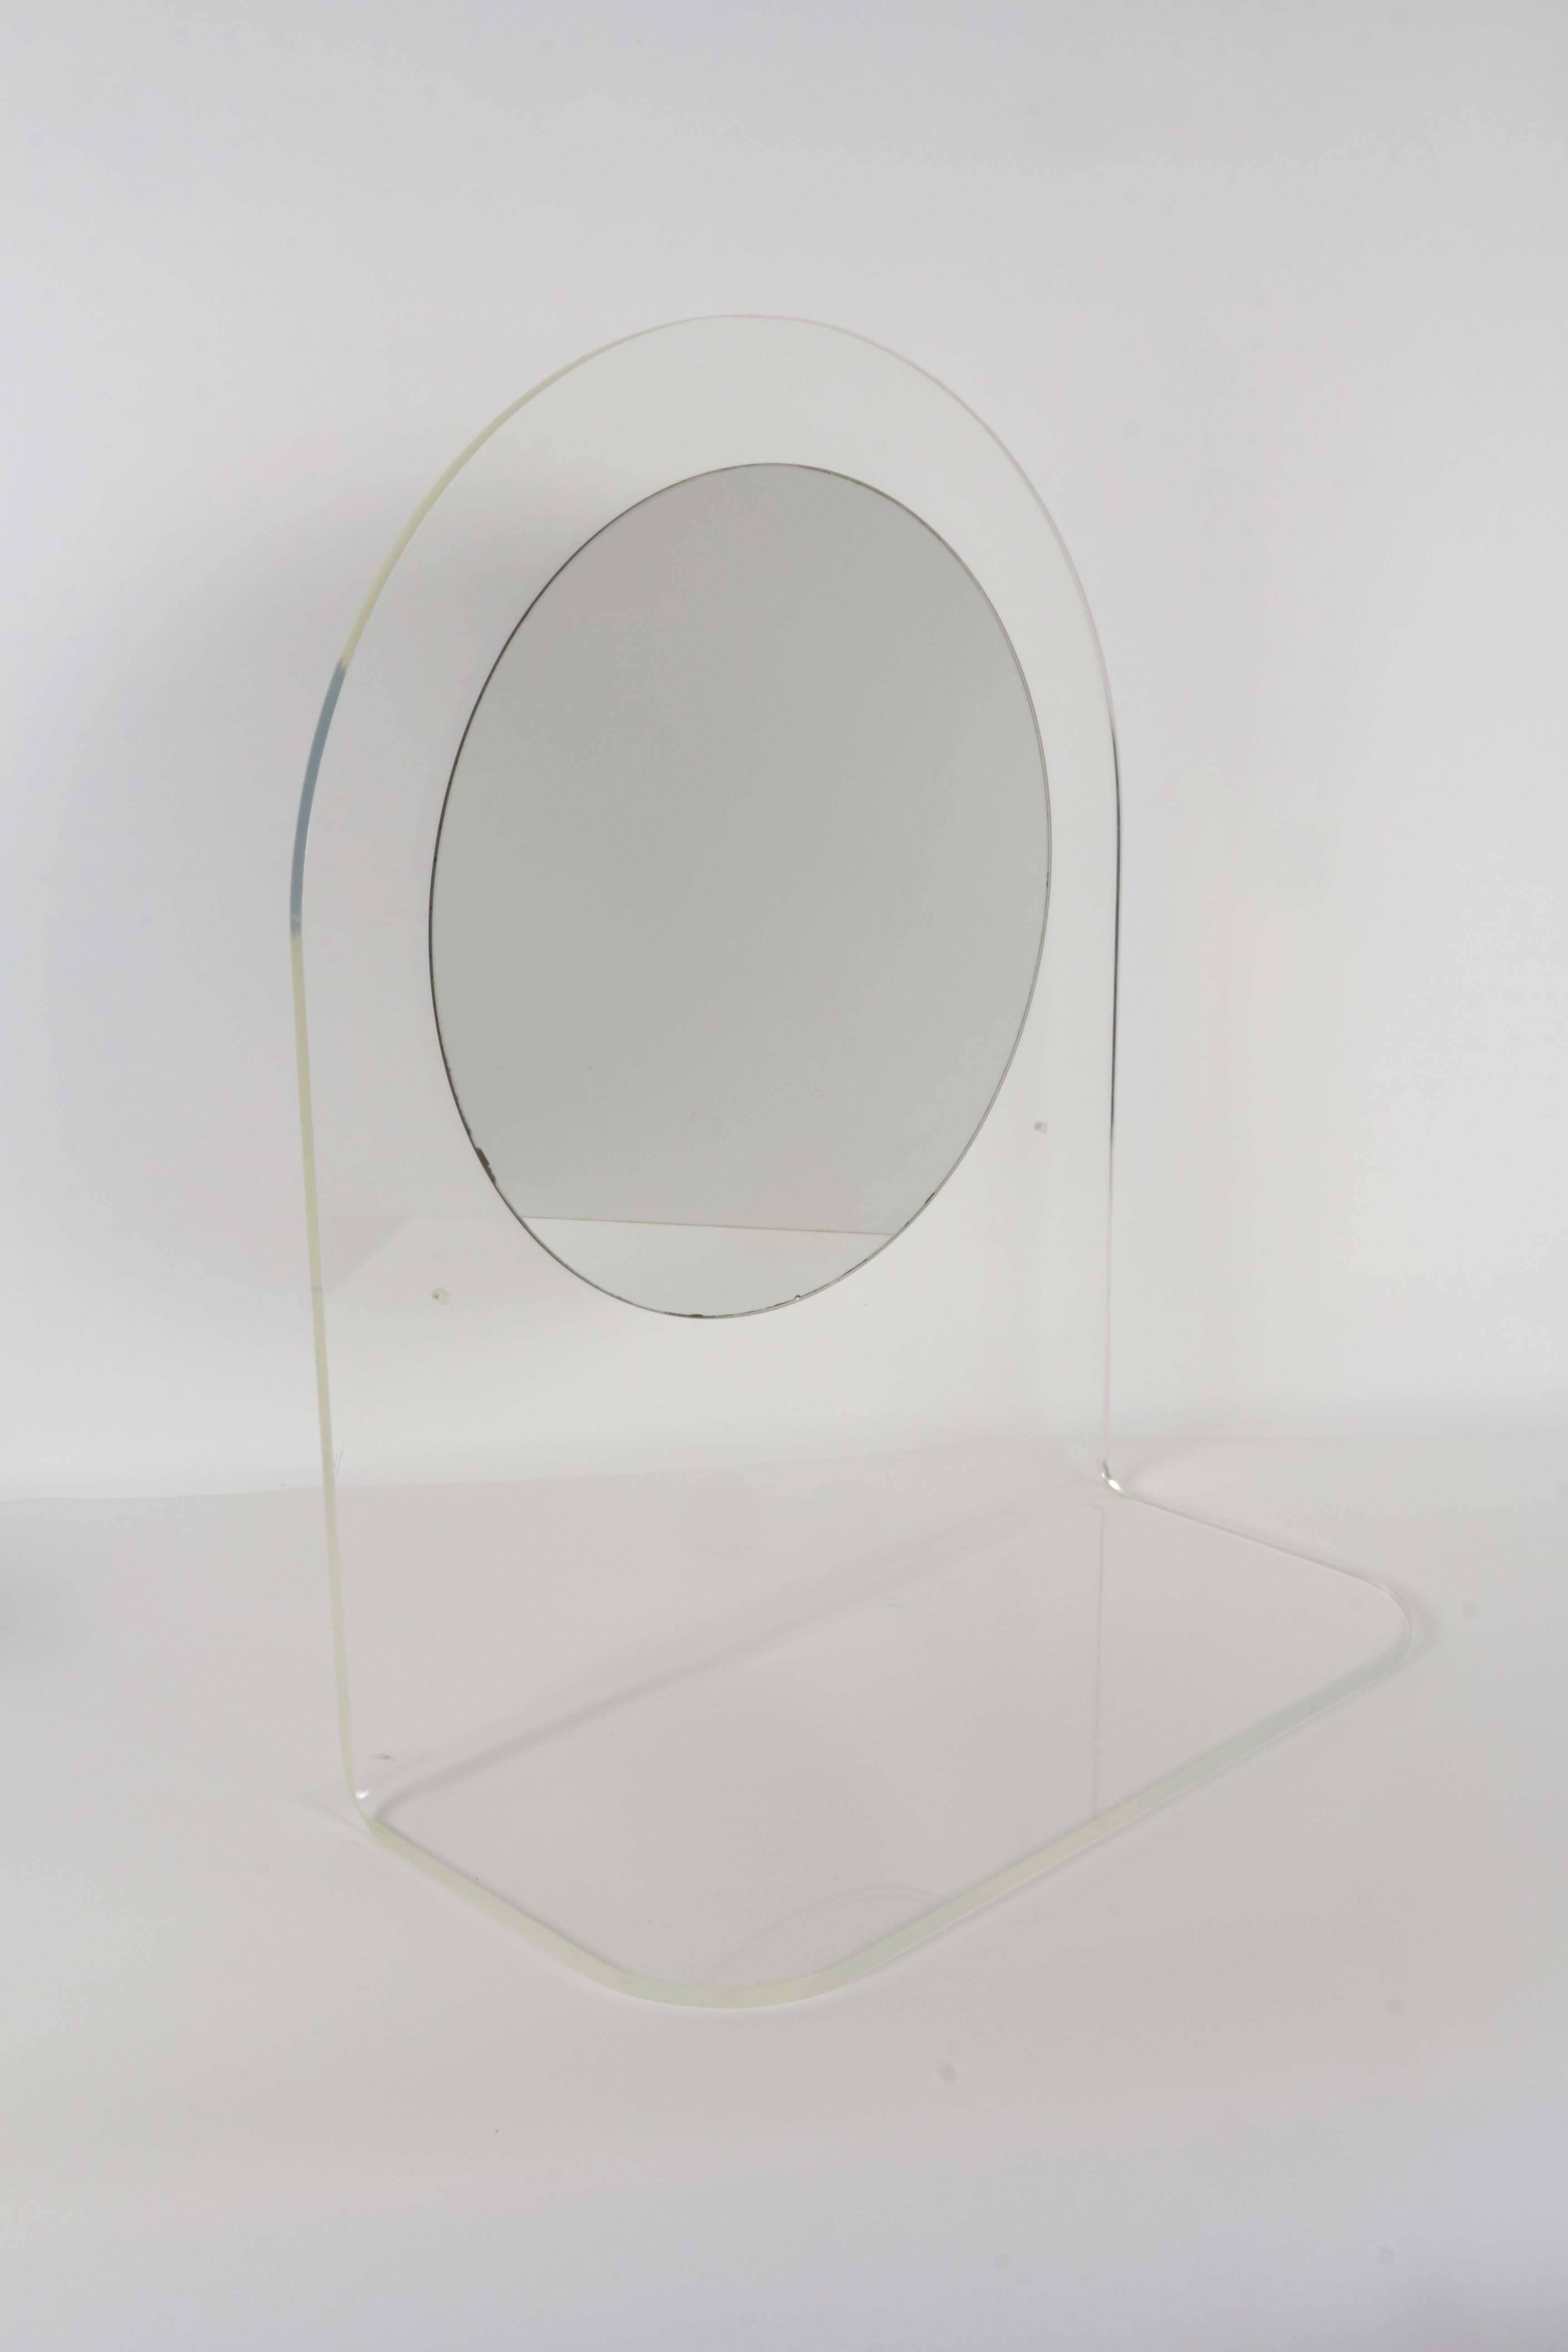 A highly modern wall shelf, with mirror affixed to an arched Lucite back; includes holes to mount on wall. Very good condition, wear consistent with age and use.

10425